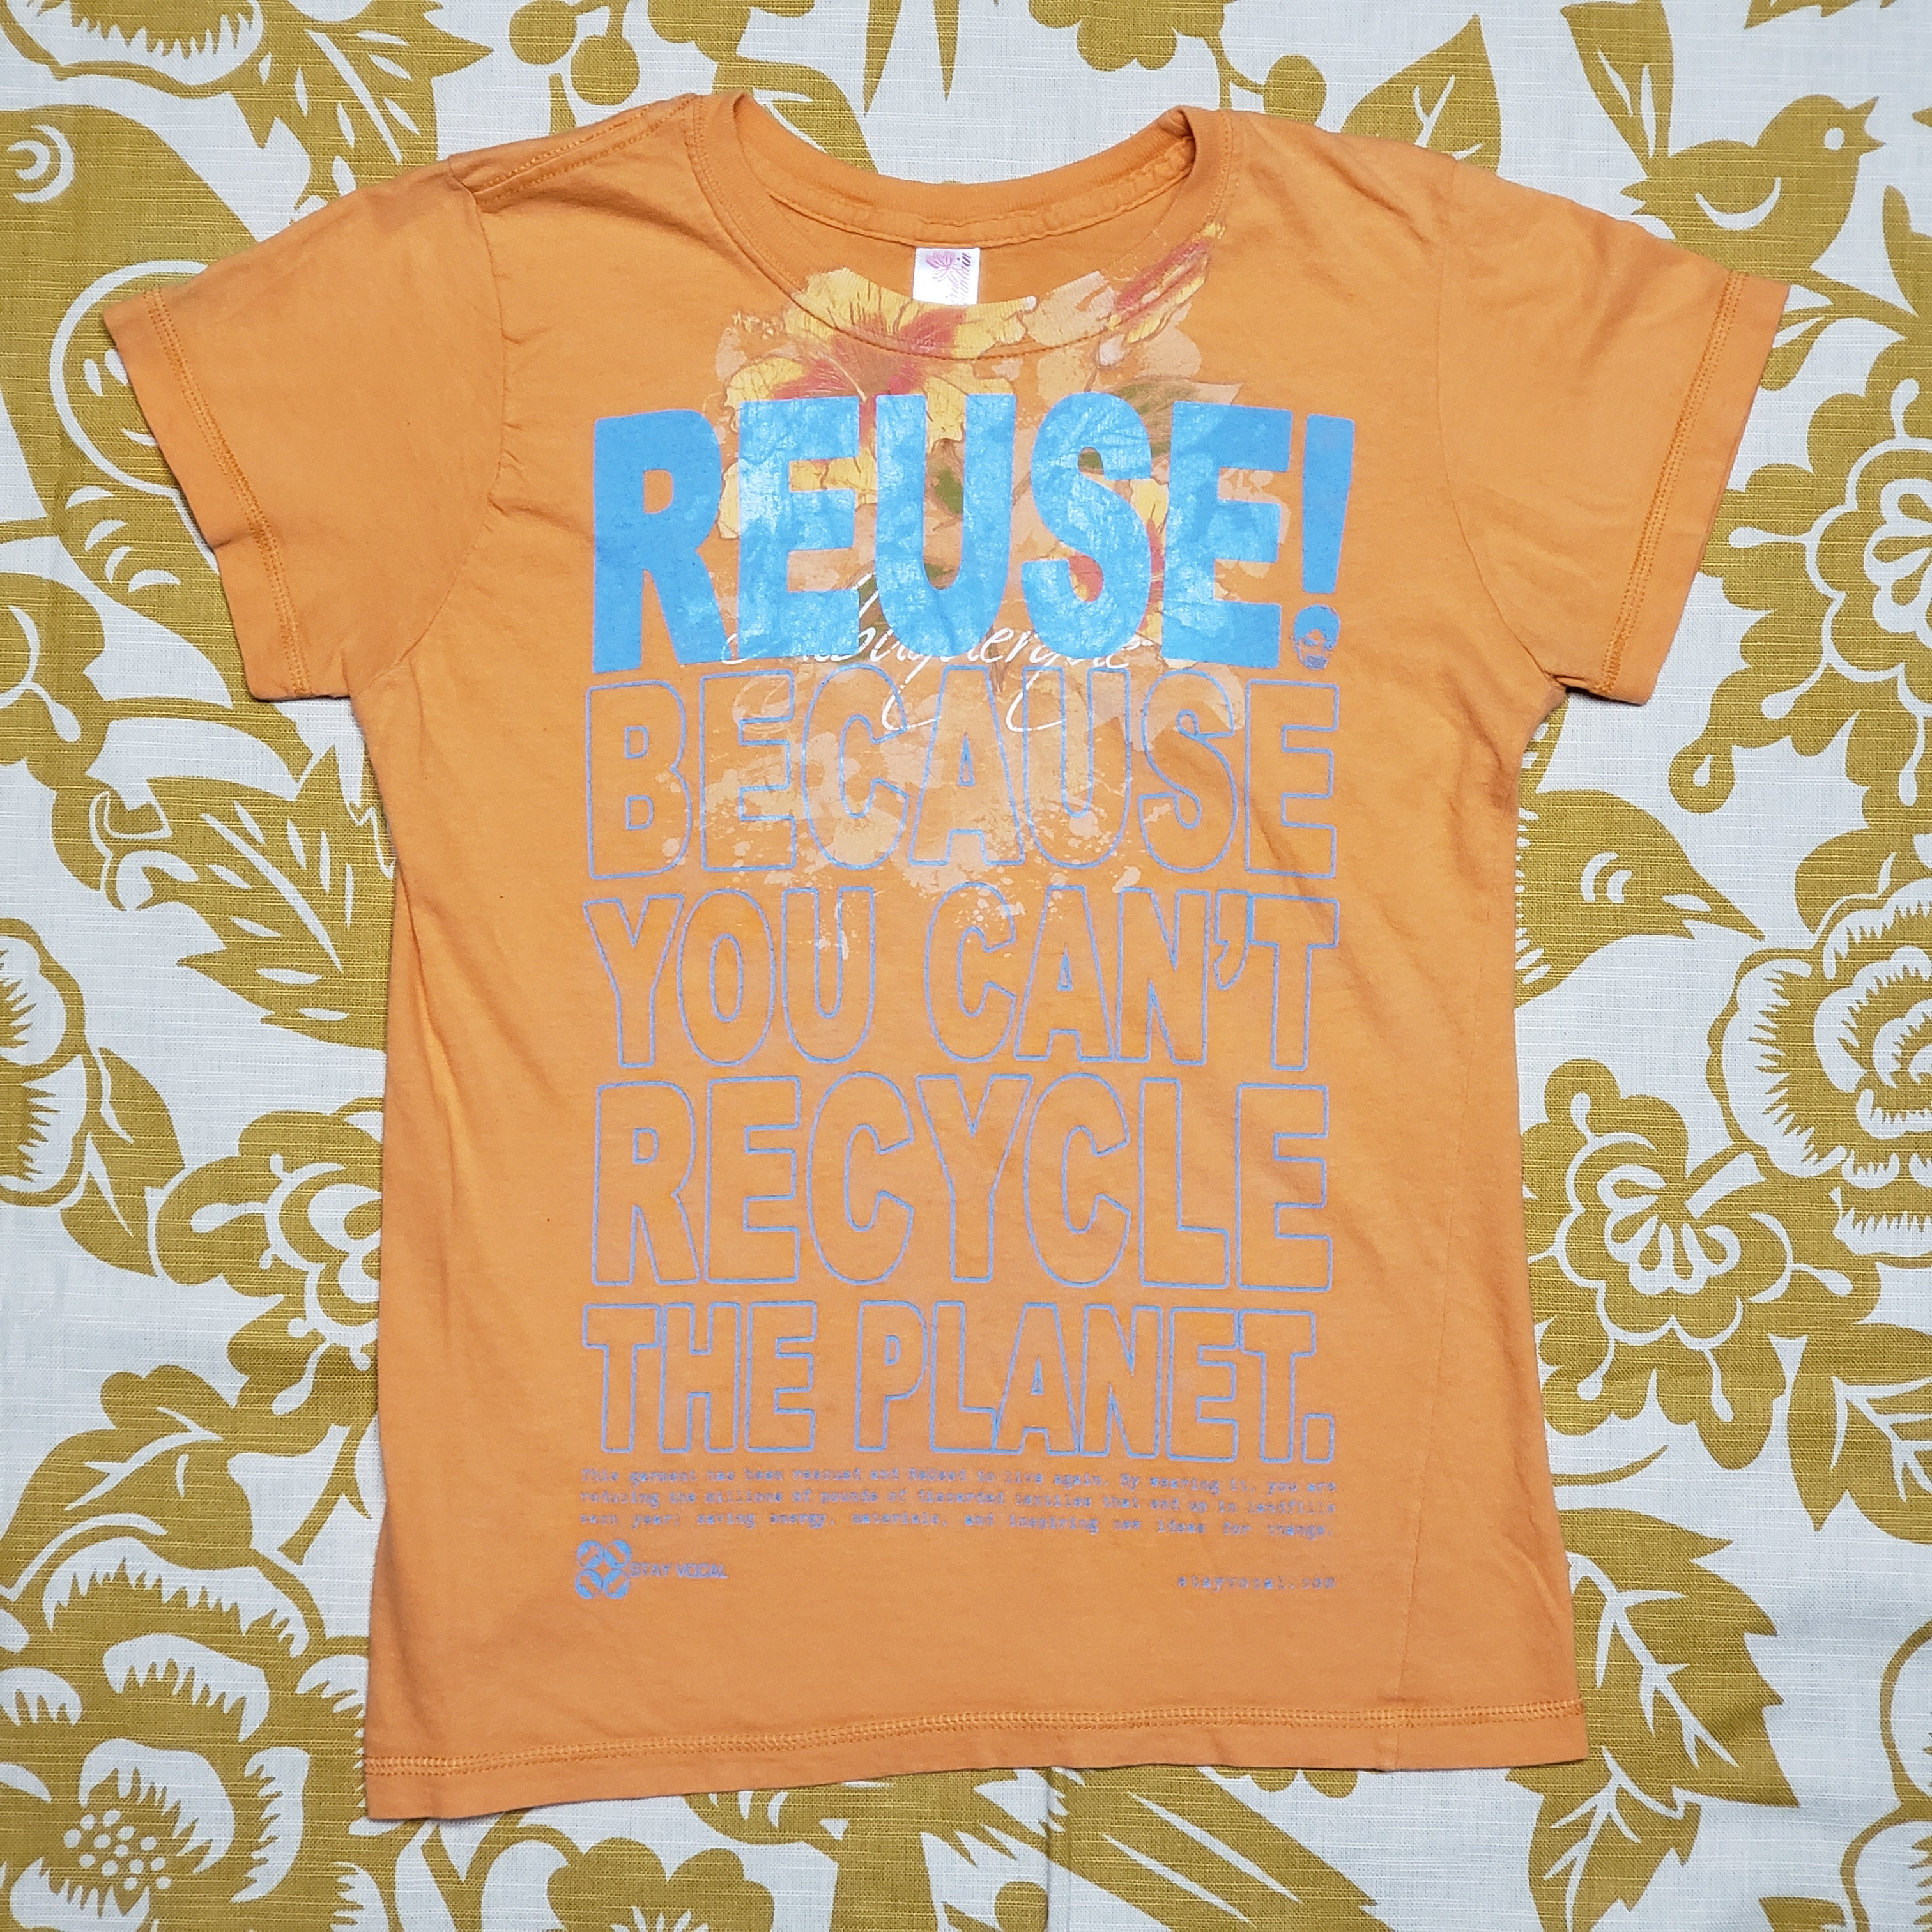 One of a Kind (Women's M) REUSE! in Albuquerque T-Shirt